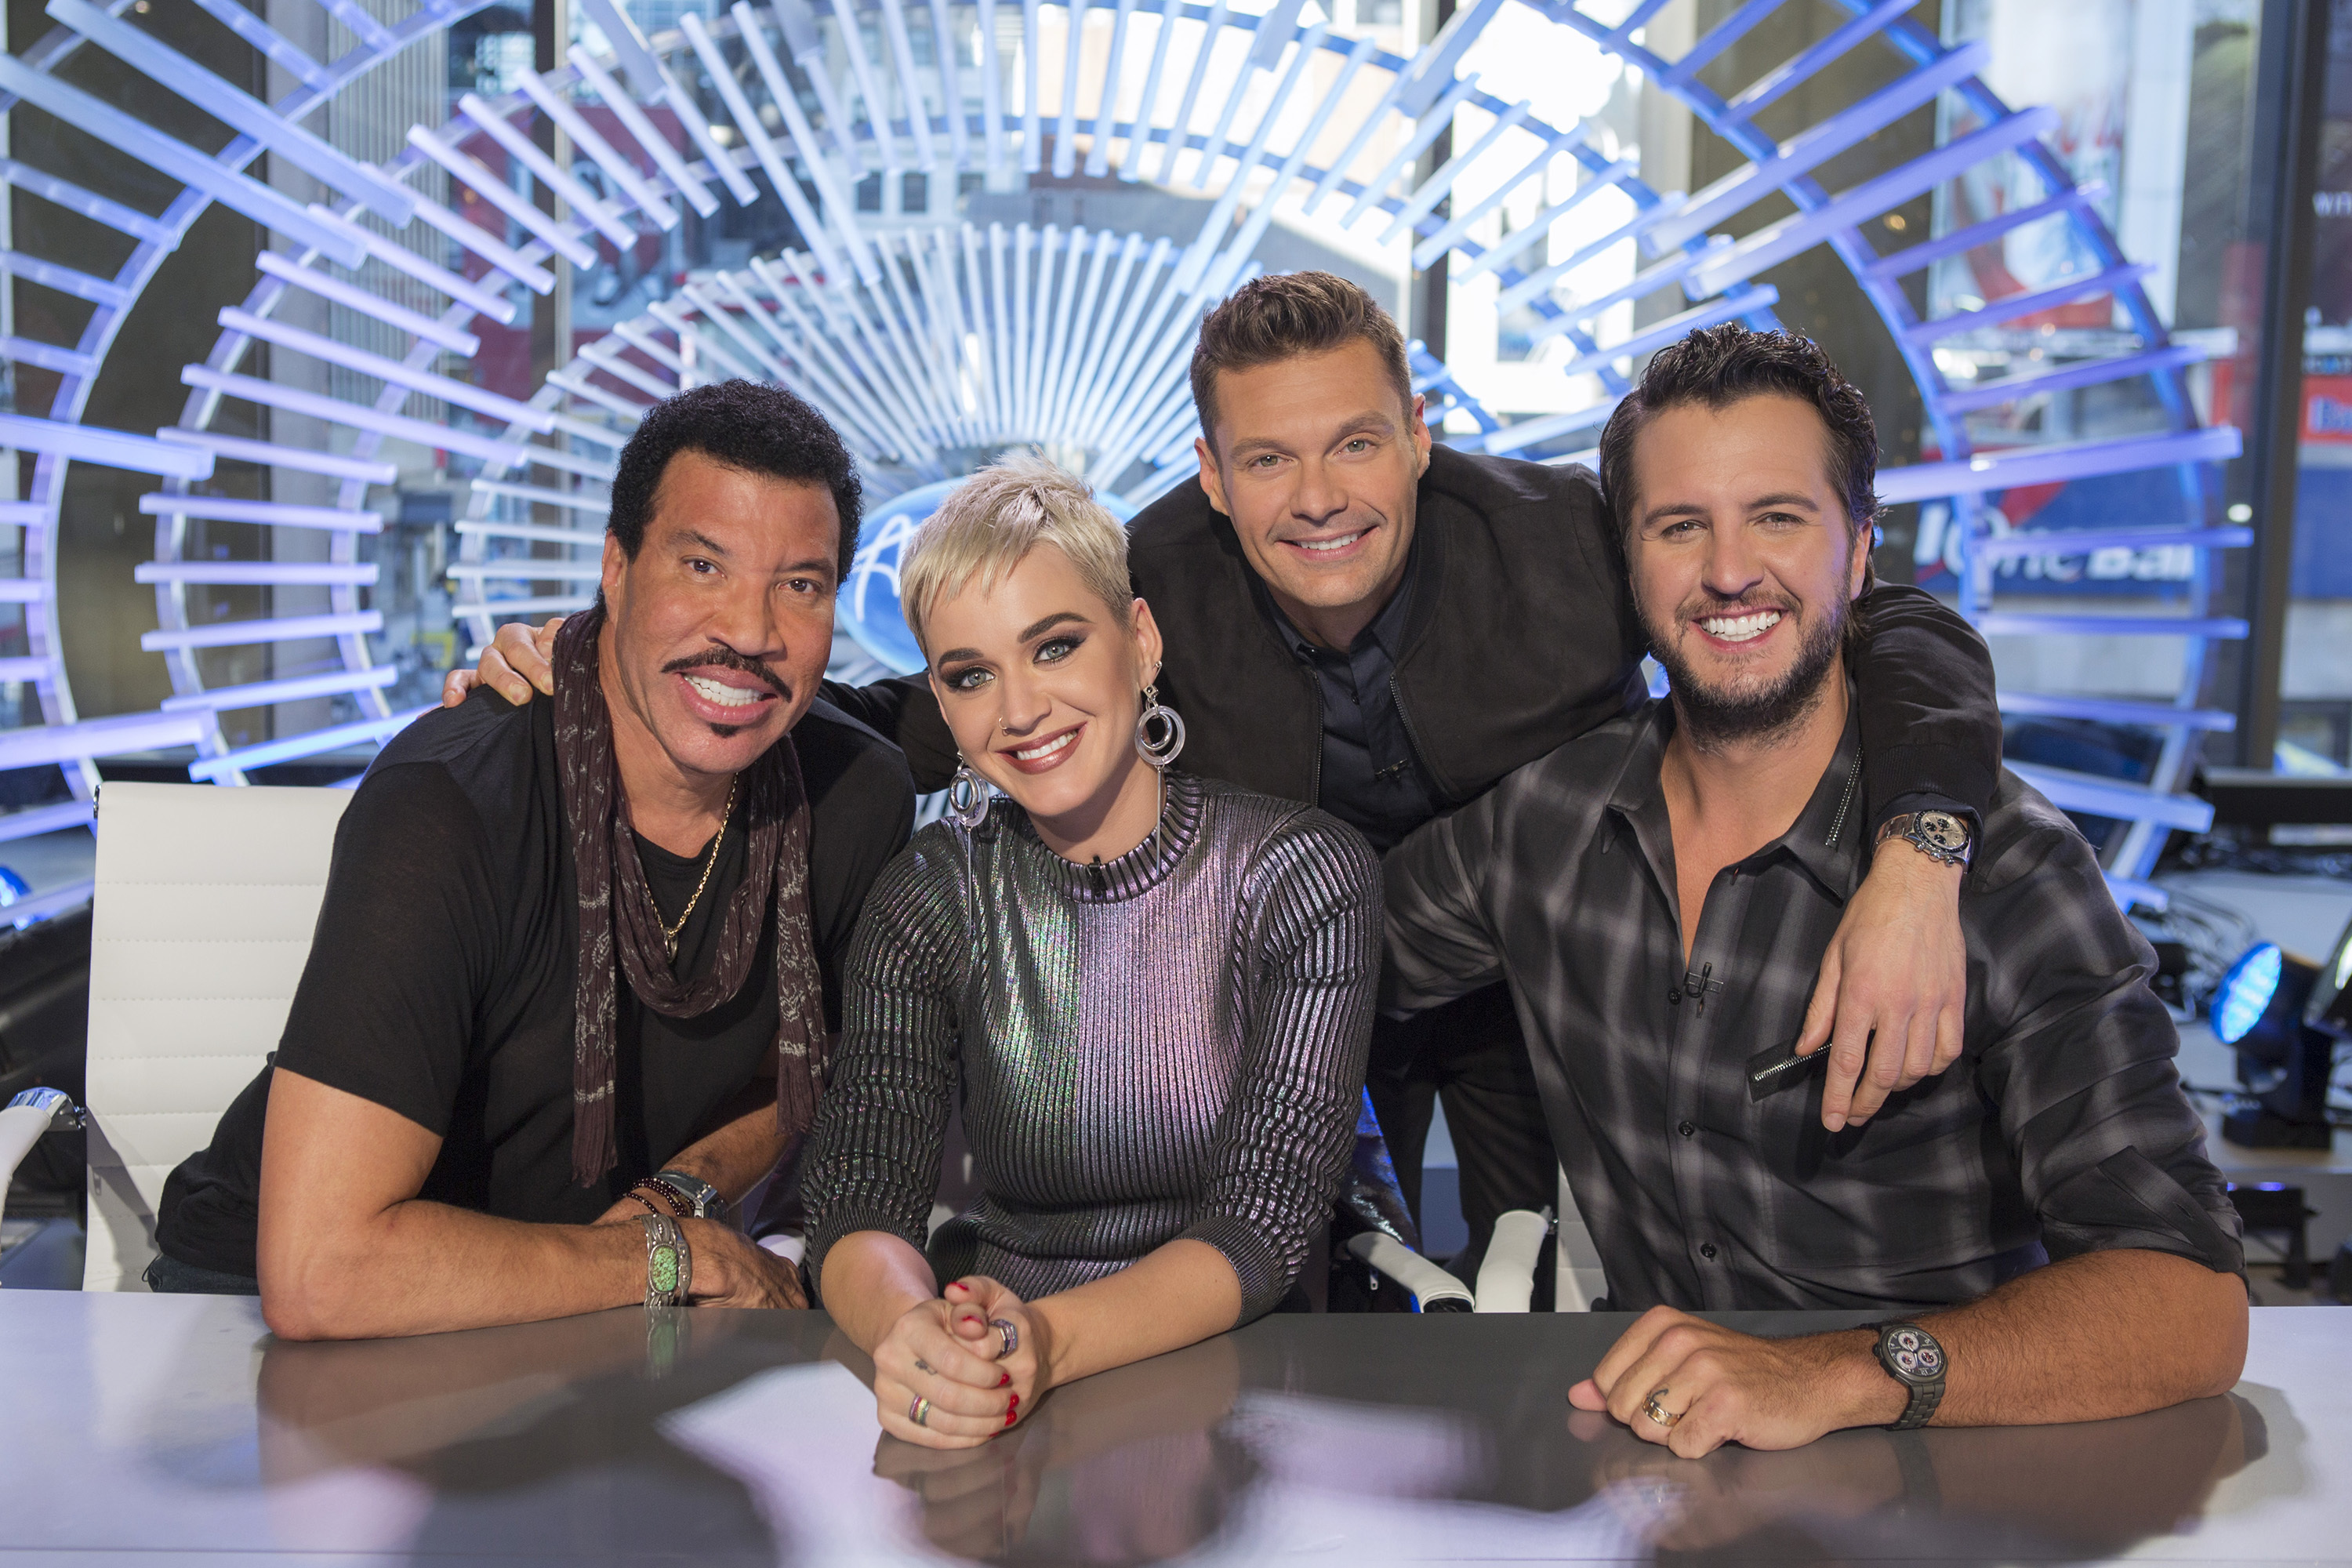 American Idol ABC Revival of Music Competition to Air Twice a Week